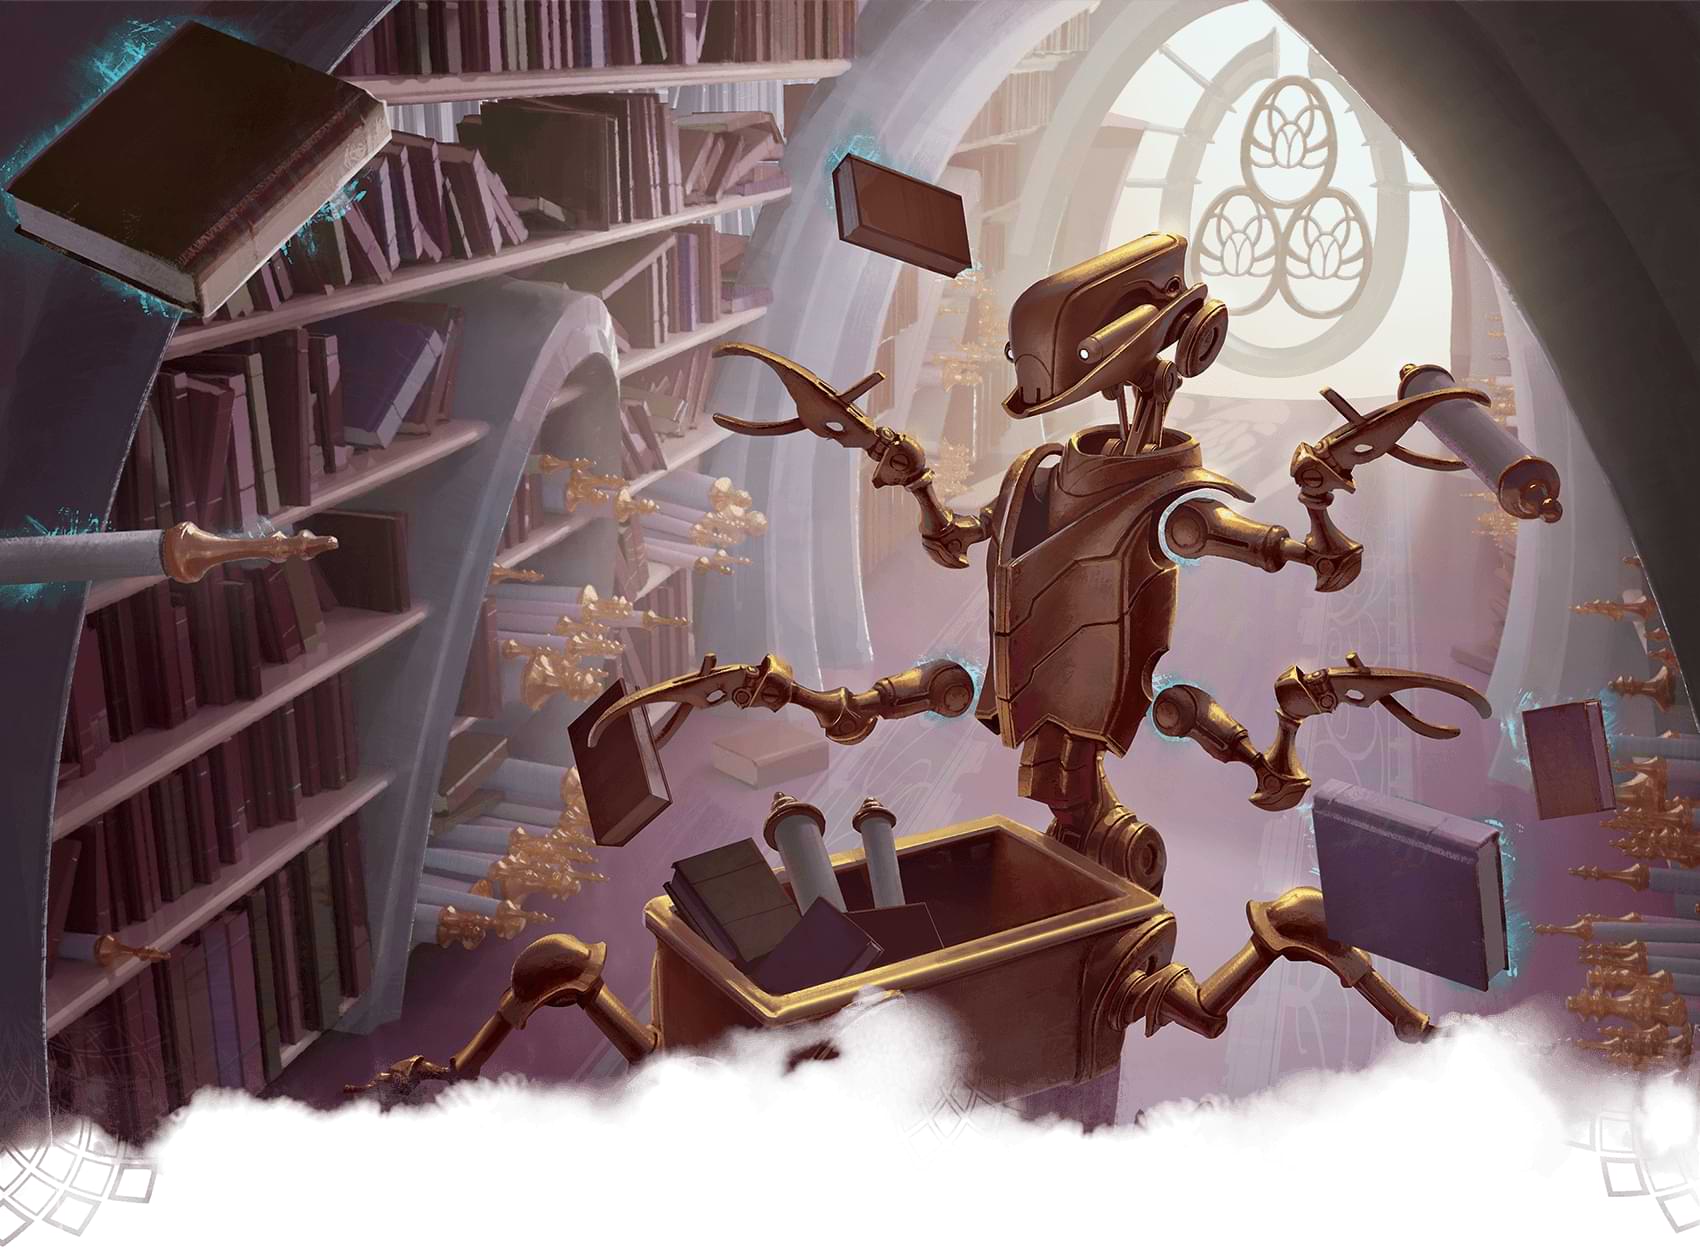 A robot assistant helps sort through books and scrolls